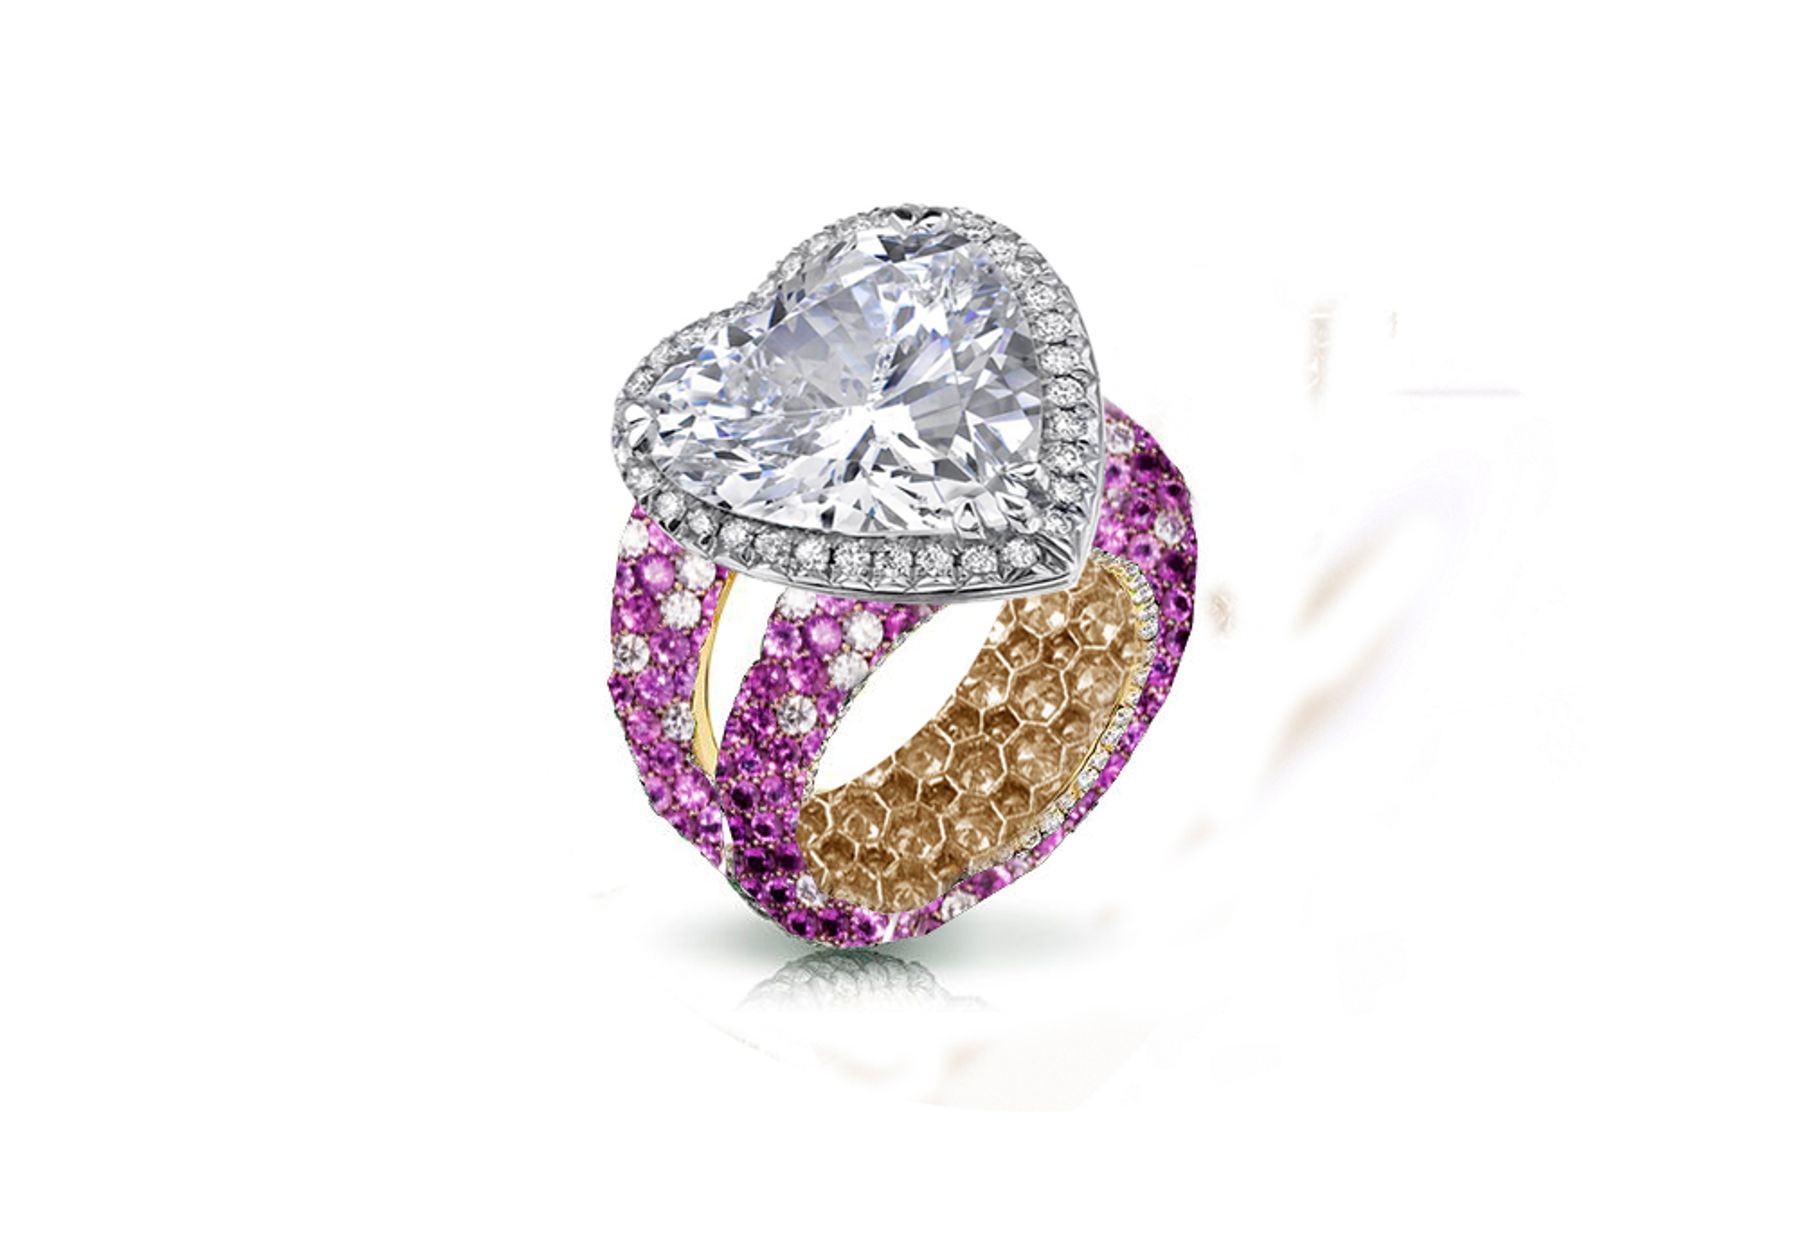 Halo Heart Diamond Ring with Diamonds & Pink Sapphires in Gold or Platinum